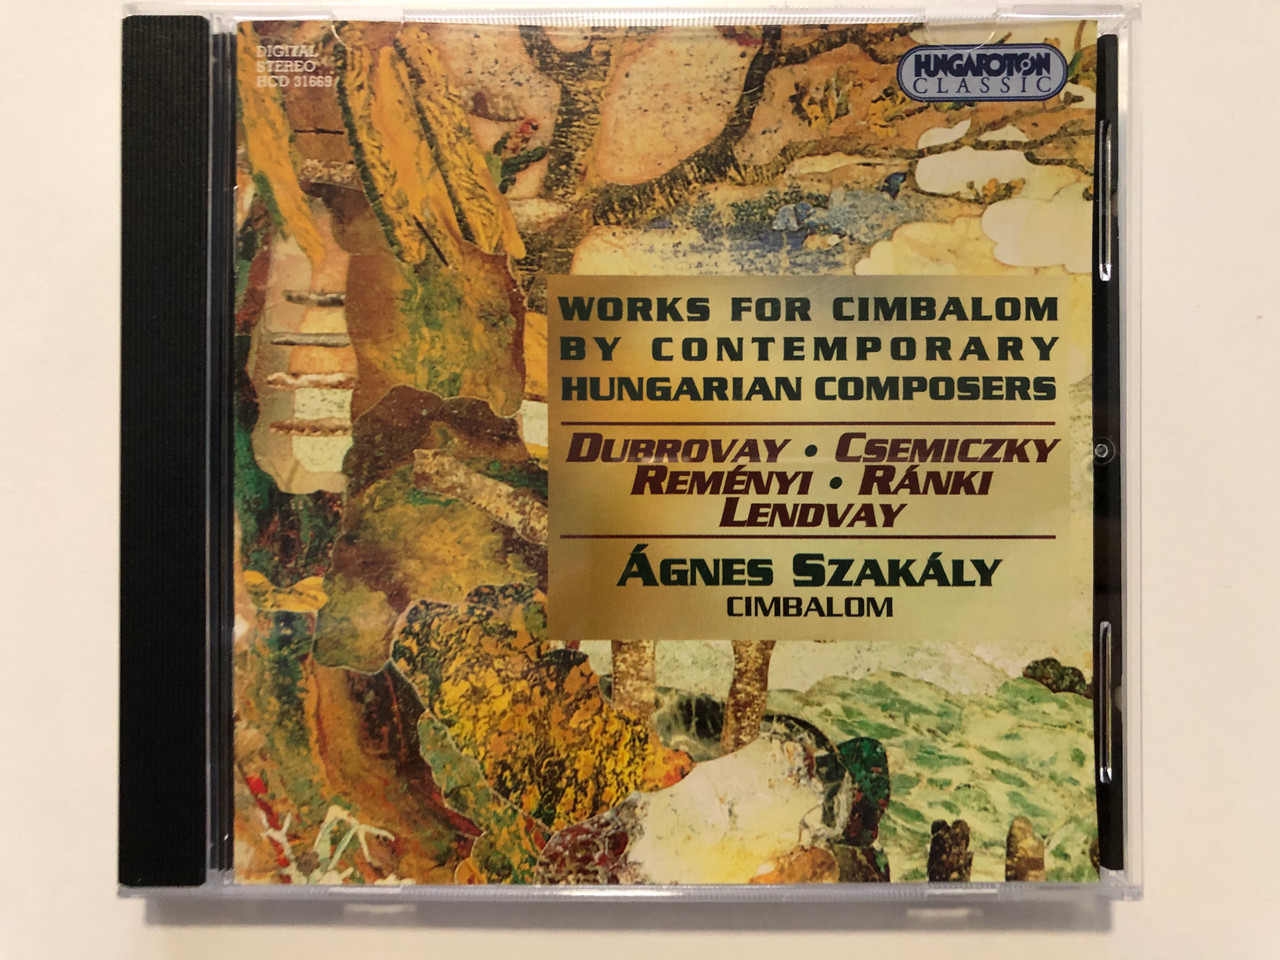 https://cdn10.bigcommerce.com/s-62bdpkt7pb/products/29900/images/177870/Works_For_Cimbalom_By_Contemporary_Hungarian_Composers_Dubrovay_Csemiczky_Remnyi_Rnki_Lendvay_gnes_Szakly_-_cimbalom_Hungaroton_Classic_Audio_CD_1997_Stereo_HCD_31669_1__90607.1620669553.1280.1280.JPG?c=2&_ga=2.120083336.1691390246.1620743568-1701260778.1620743568